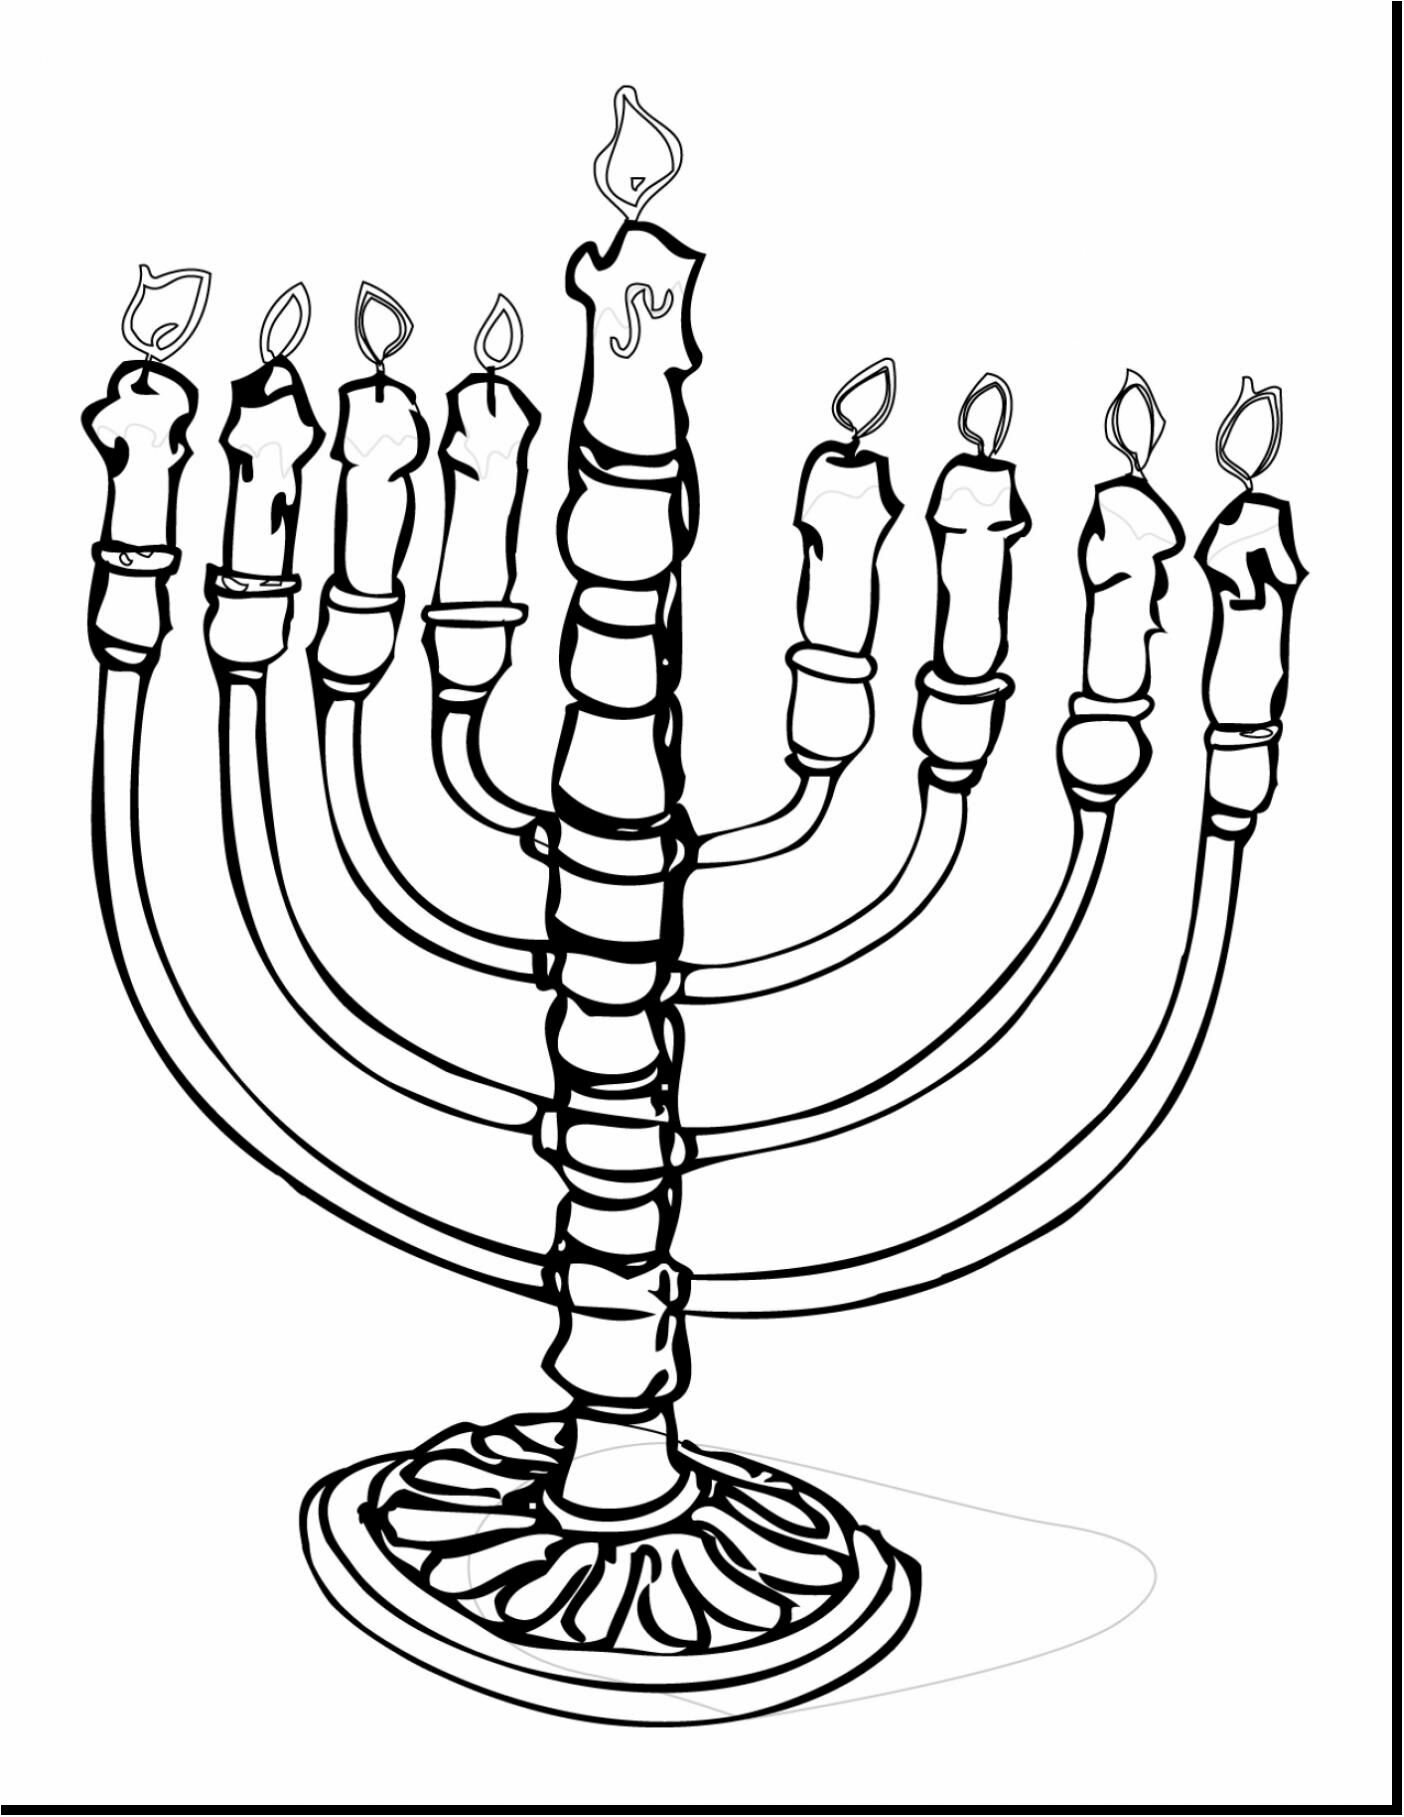 nice best of jewish holidays coloring pages gallery free coloring pages jewish symbols coloring pages 